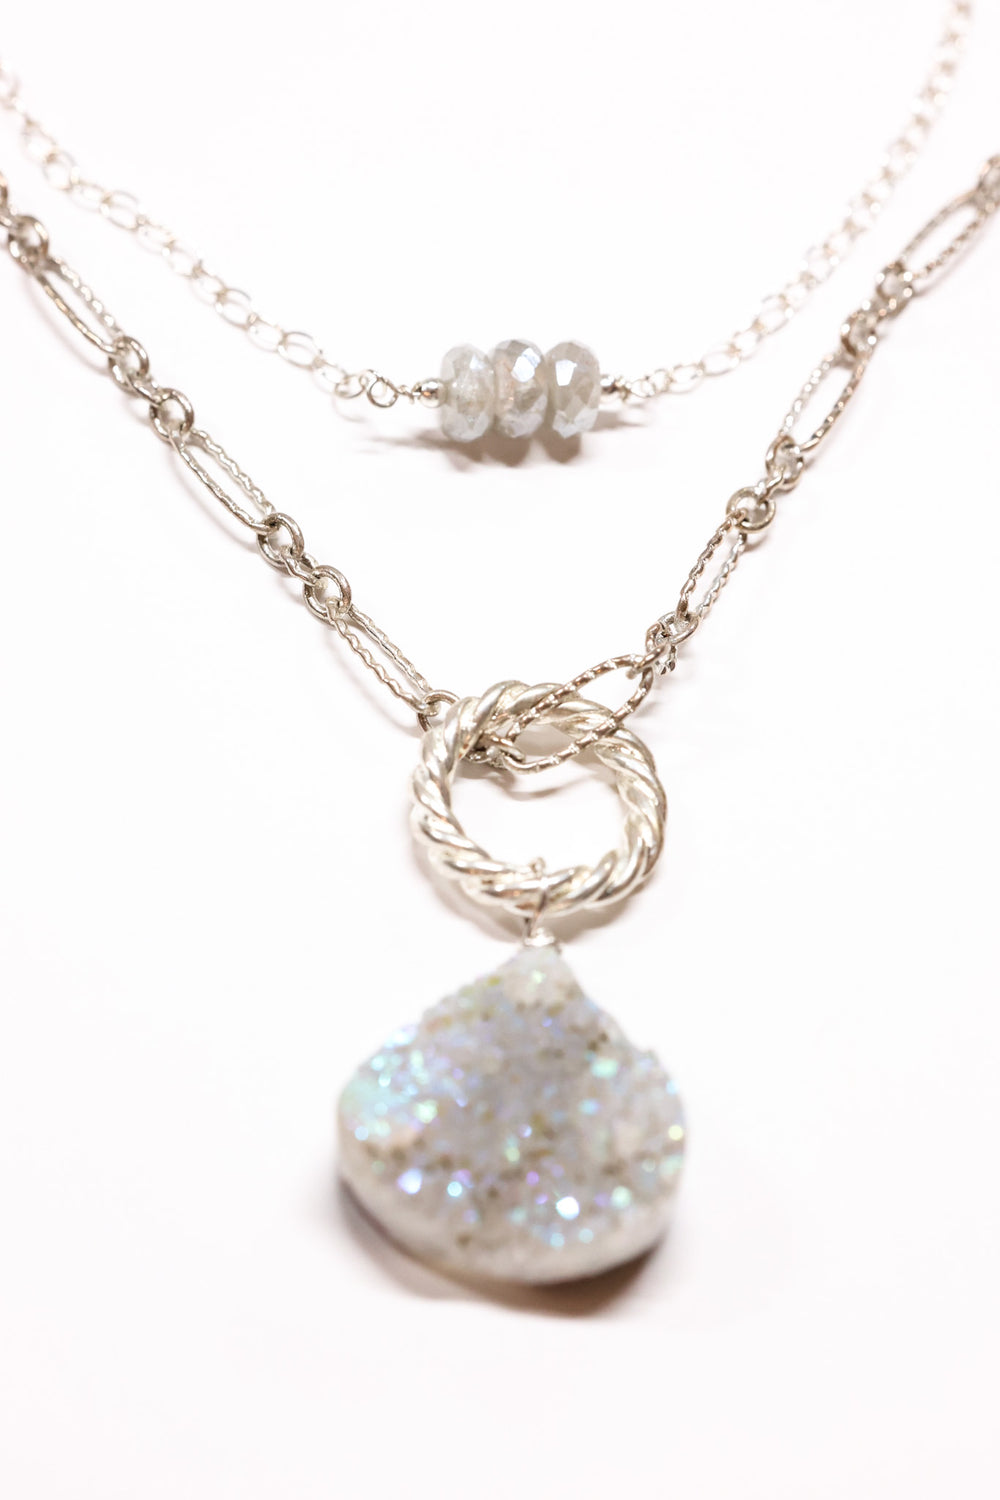 AB Drusy necklace shown layered with shorter necklace